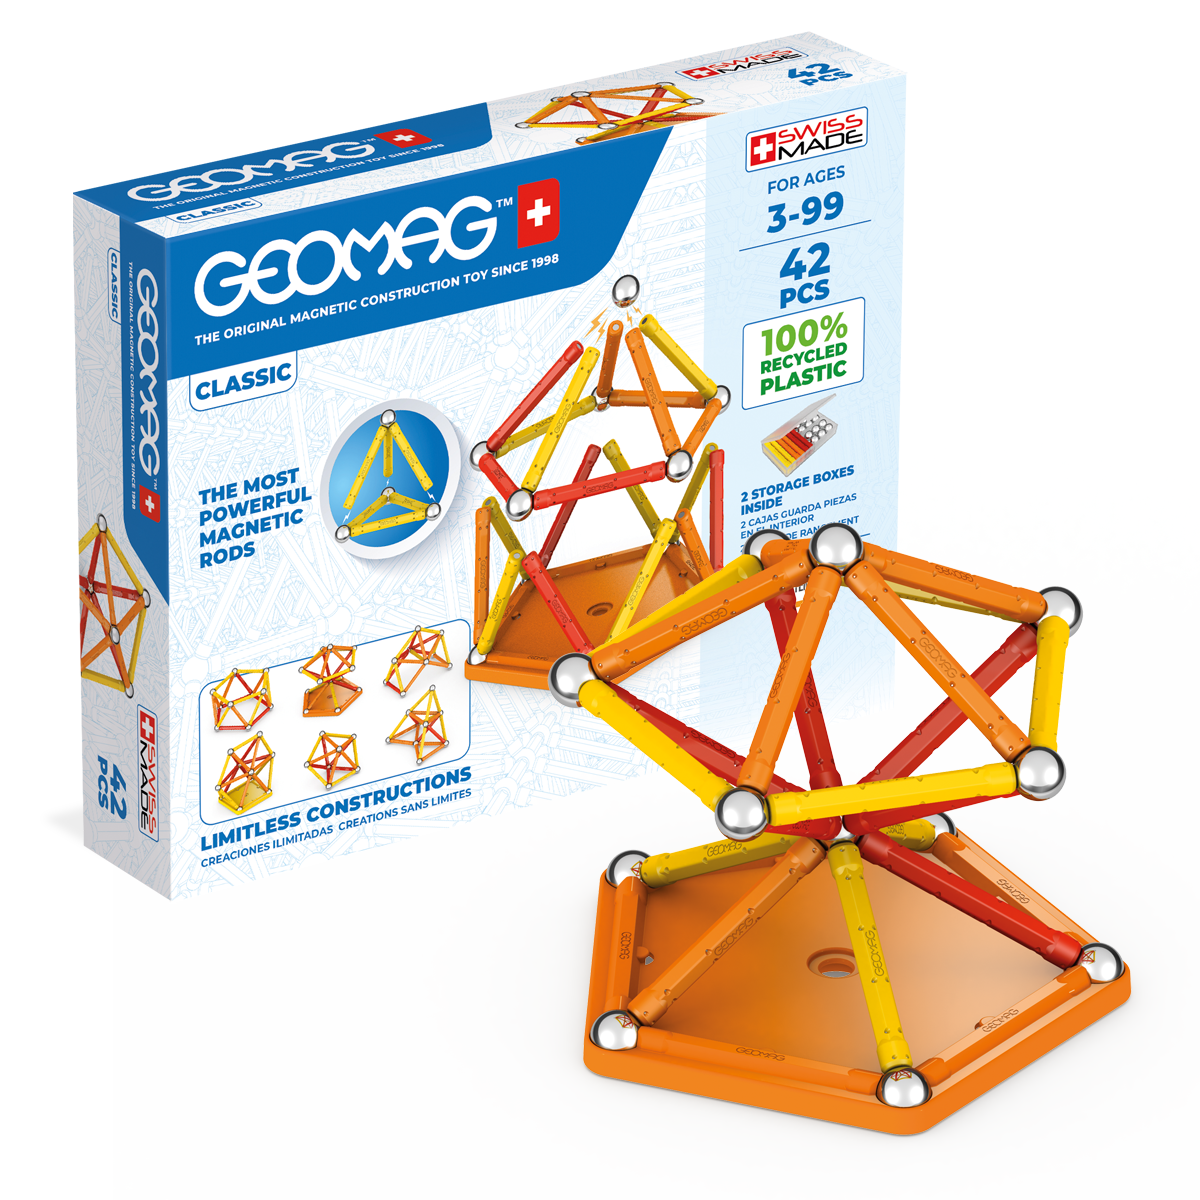 271 geomag classic recycled 42 pcs - Geomag